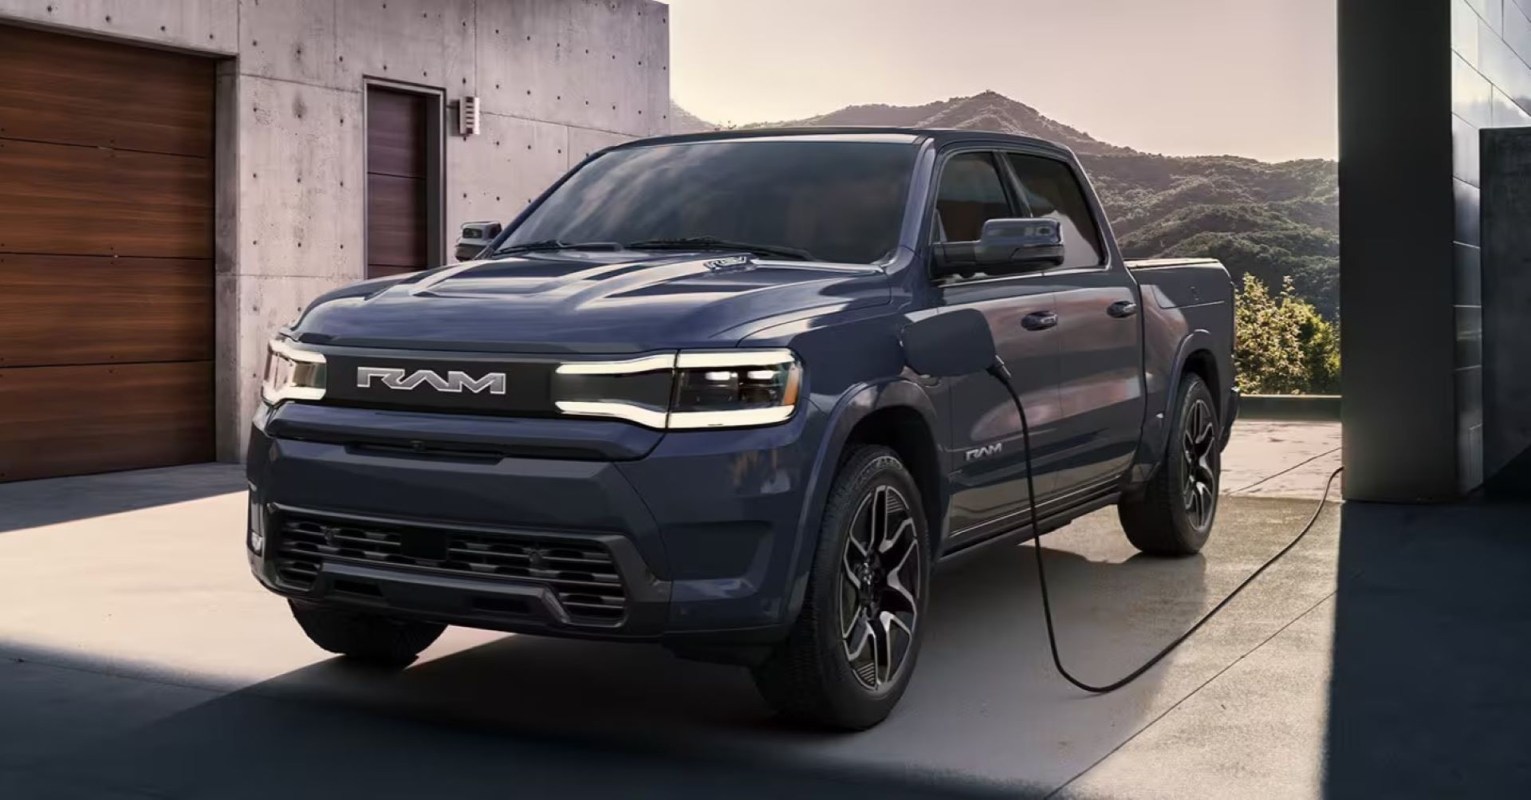 Ram 1500 REV features a superior battery pack